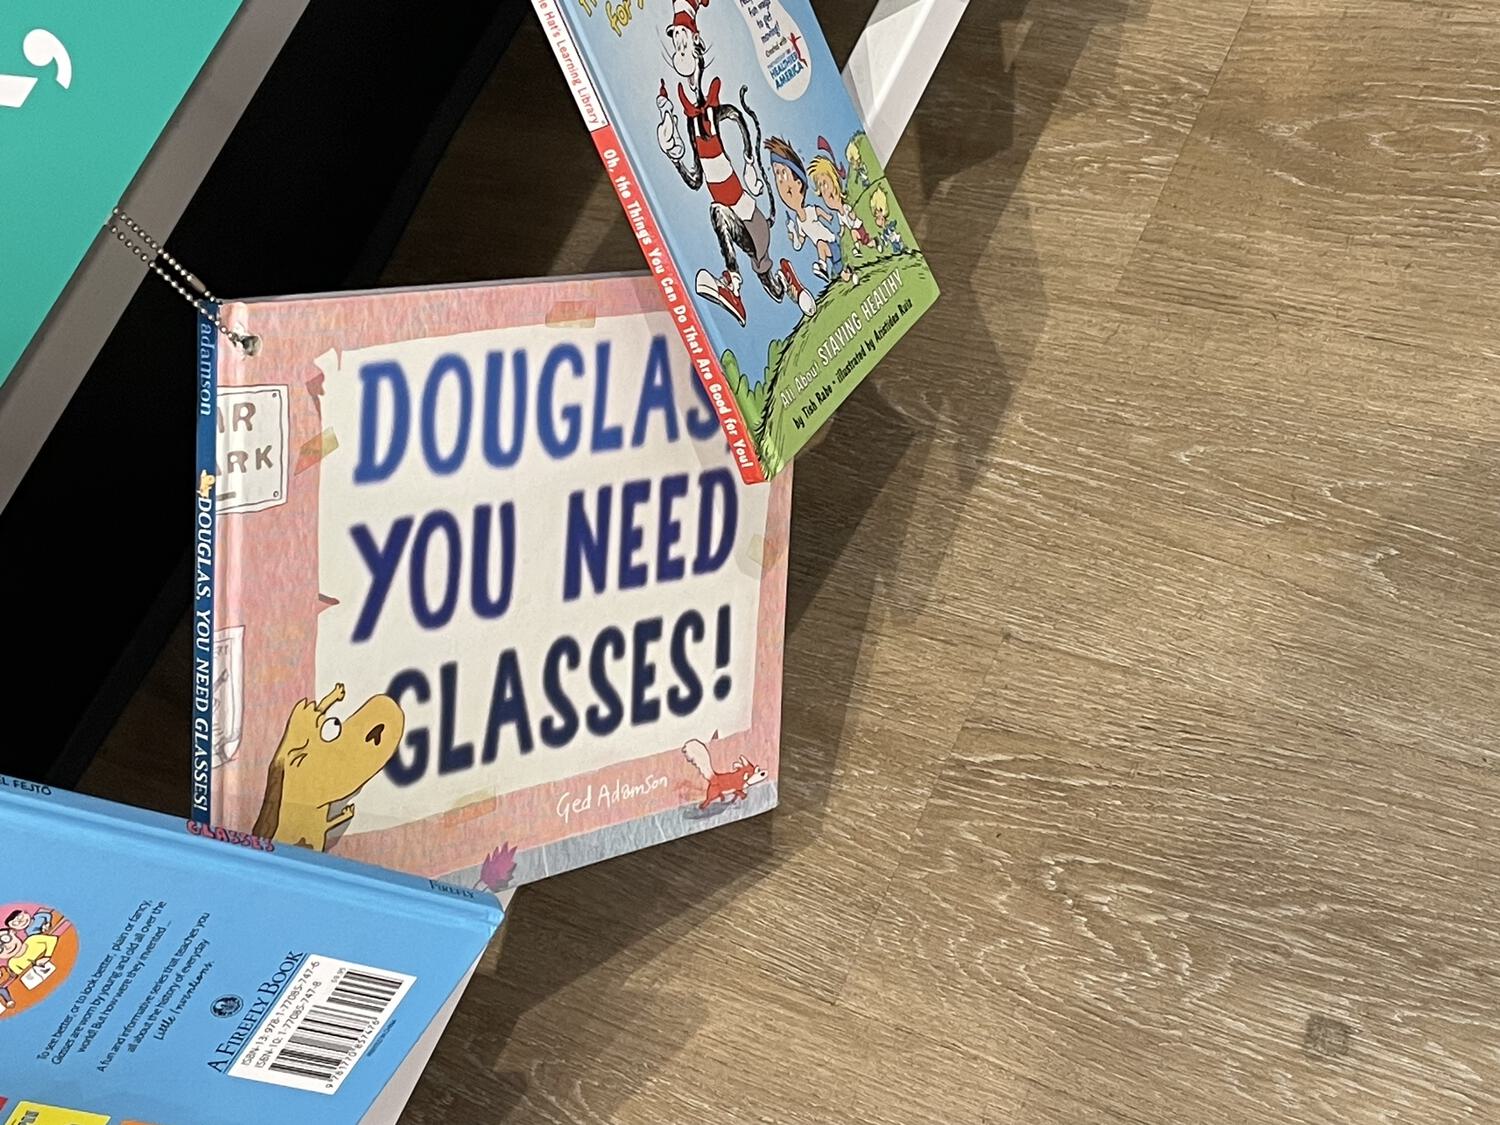 A book hanging by a chain from a counter. Its title is "Douglas, You Need Glasses!"